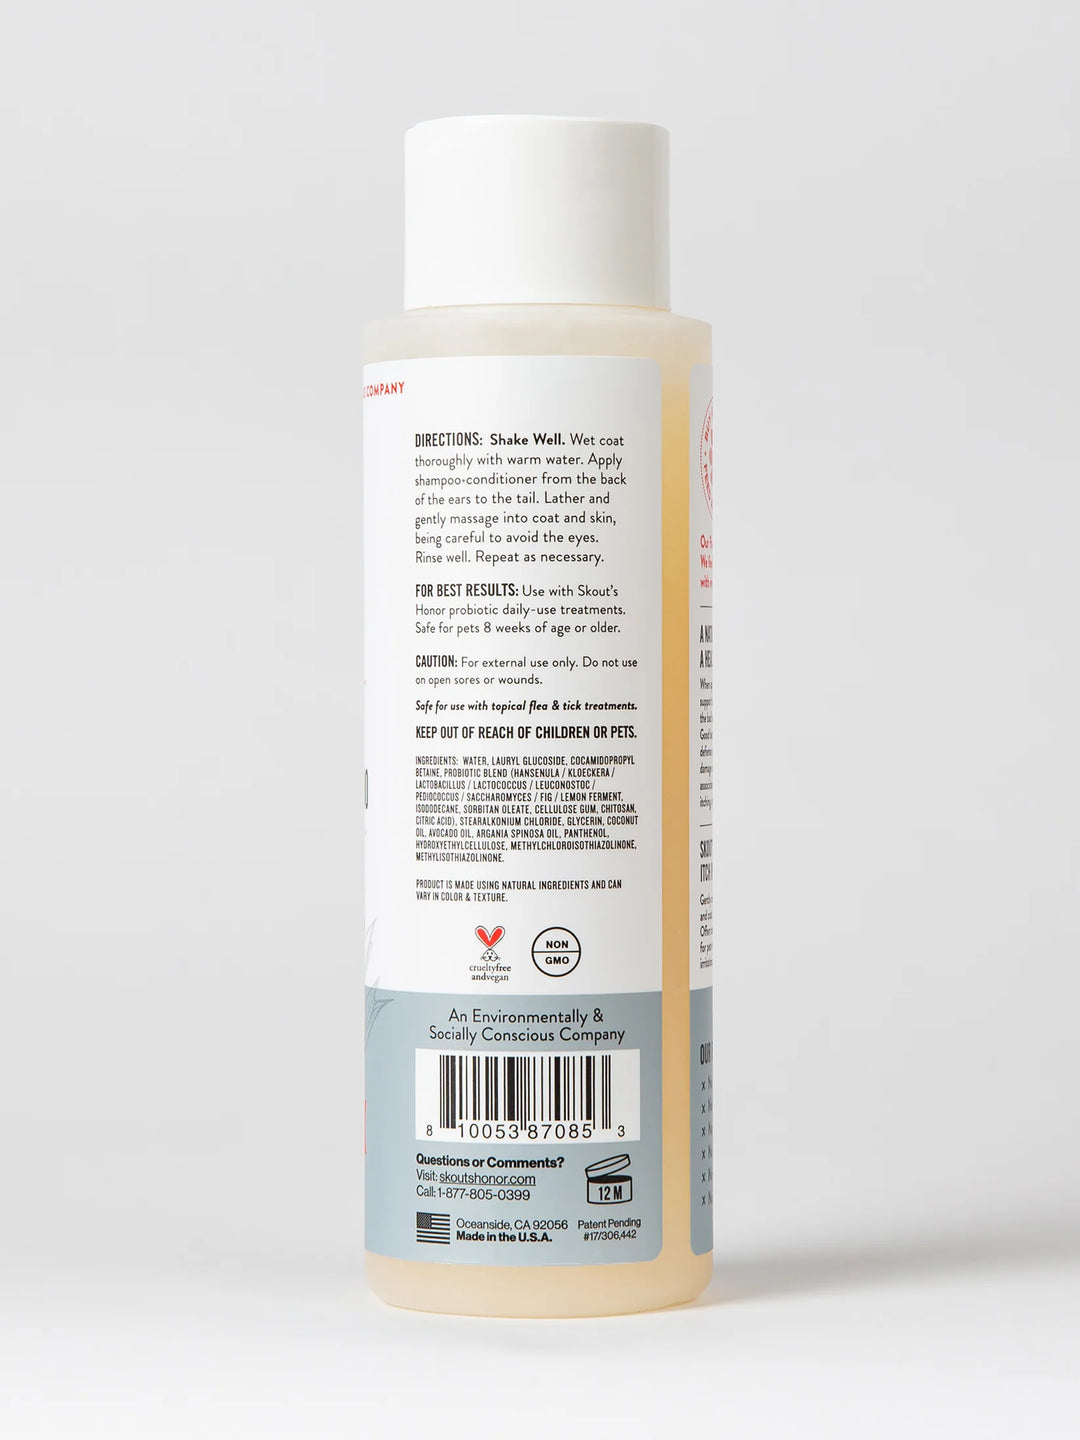 Skout's Honor - Itch Relief Shampoo